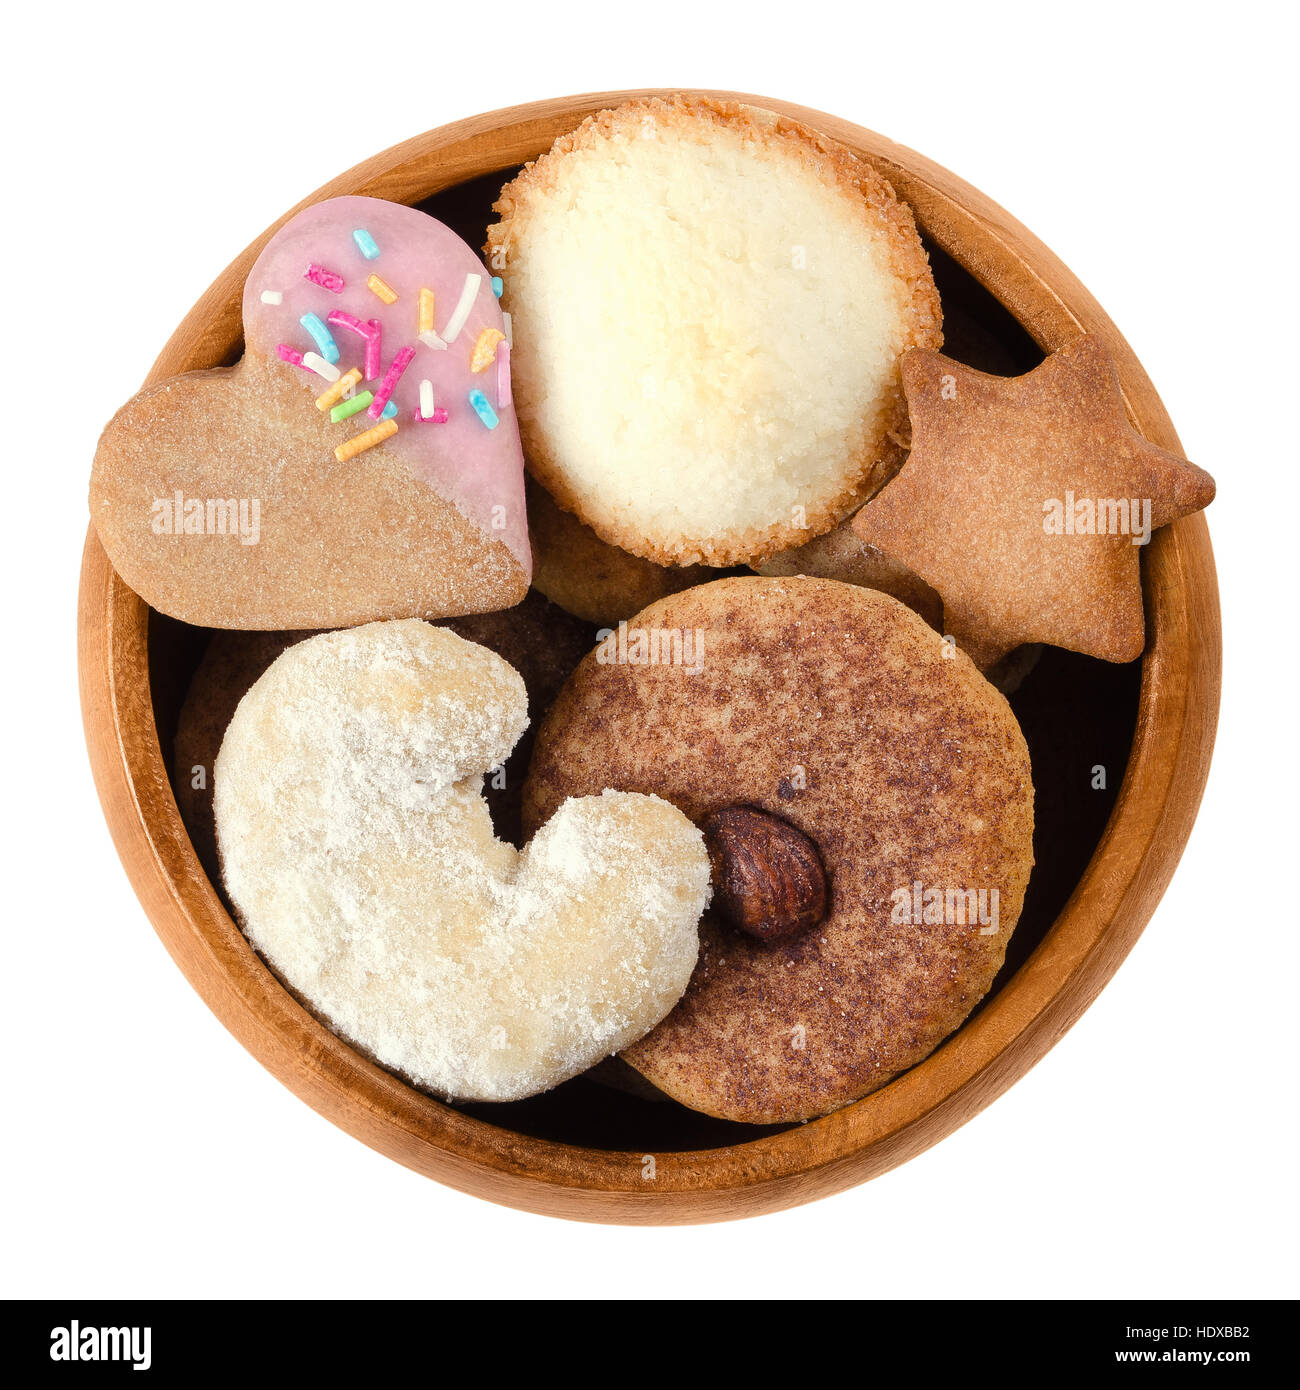 Cookies and biscuits in wooden bowl. Assorted flat sweet baked goods in heart, crescent, star and disc shapes. Stock Photo